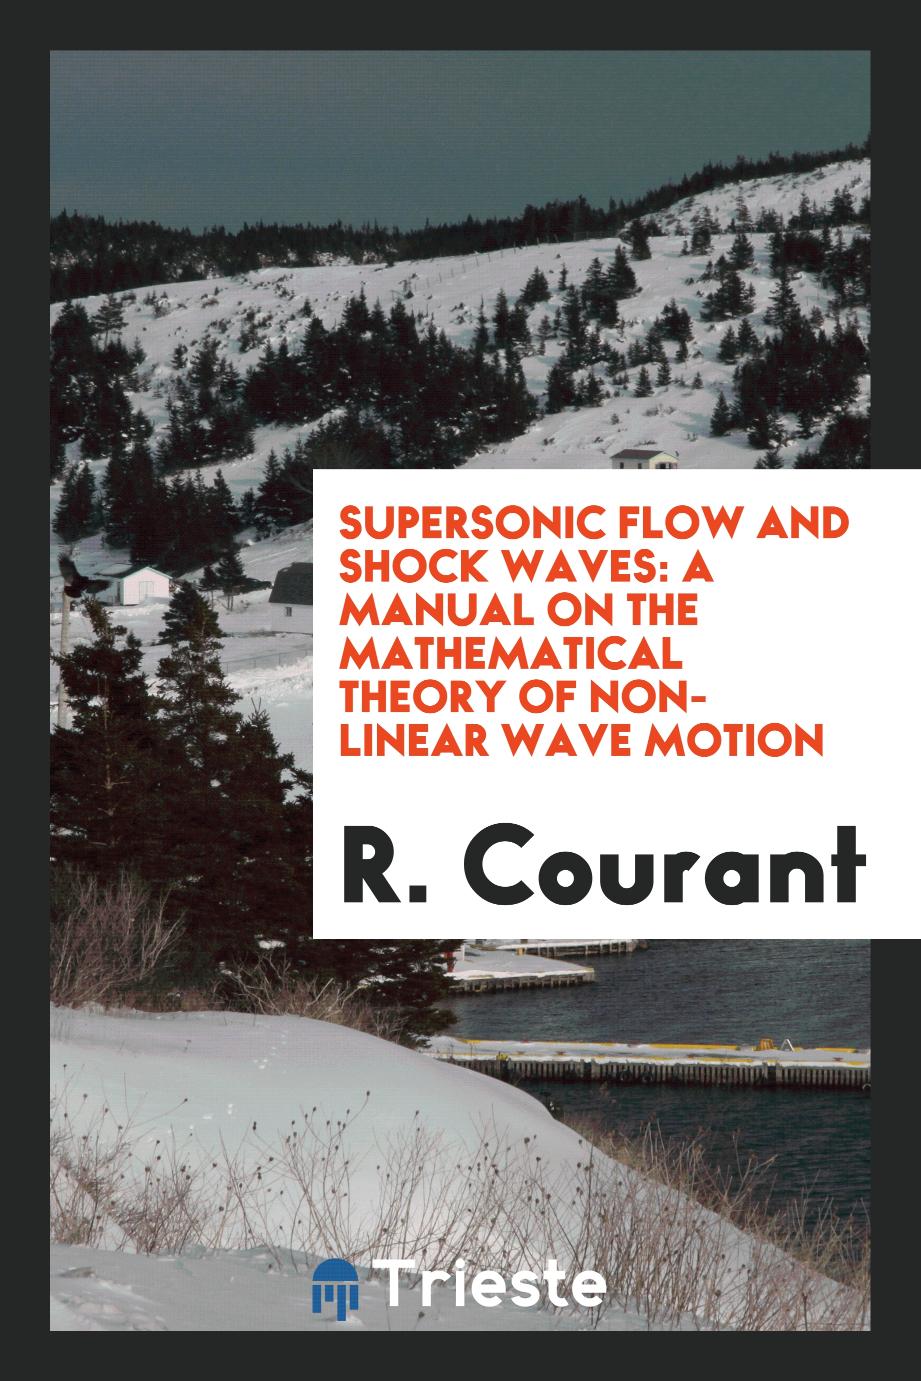 Supersonic Flow and Shock Waves: A Manual on the Mathematical Theory of Non-Linear Wave Motion